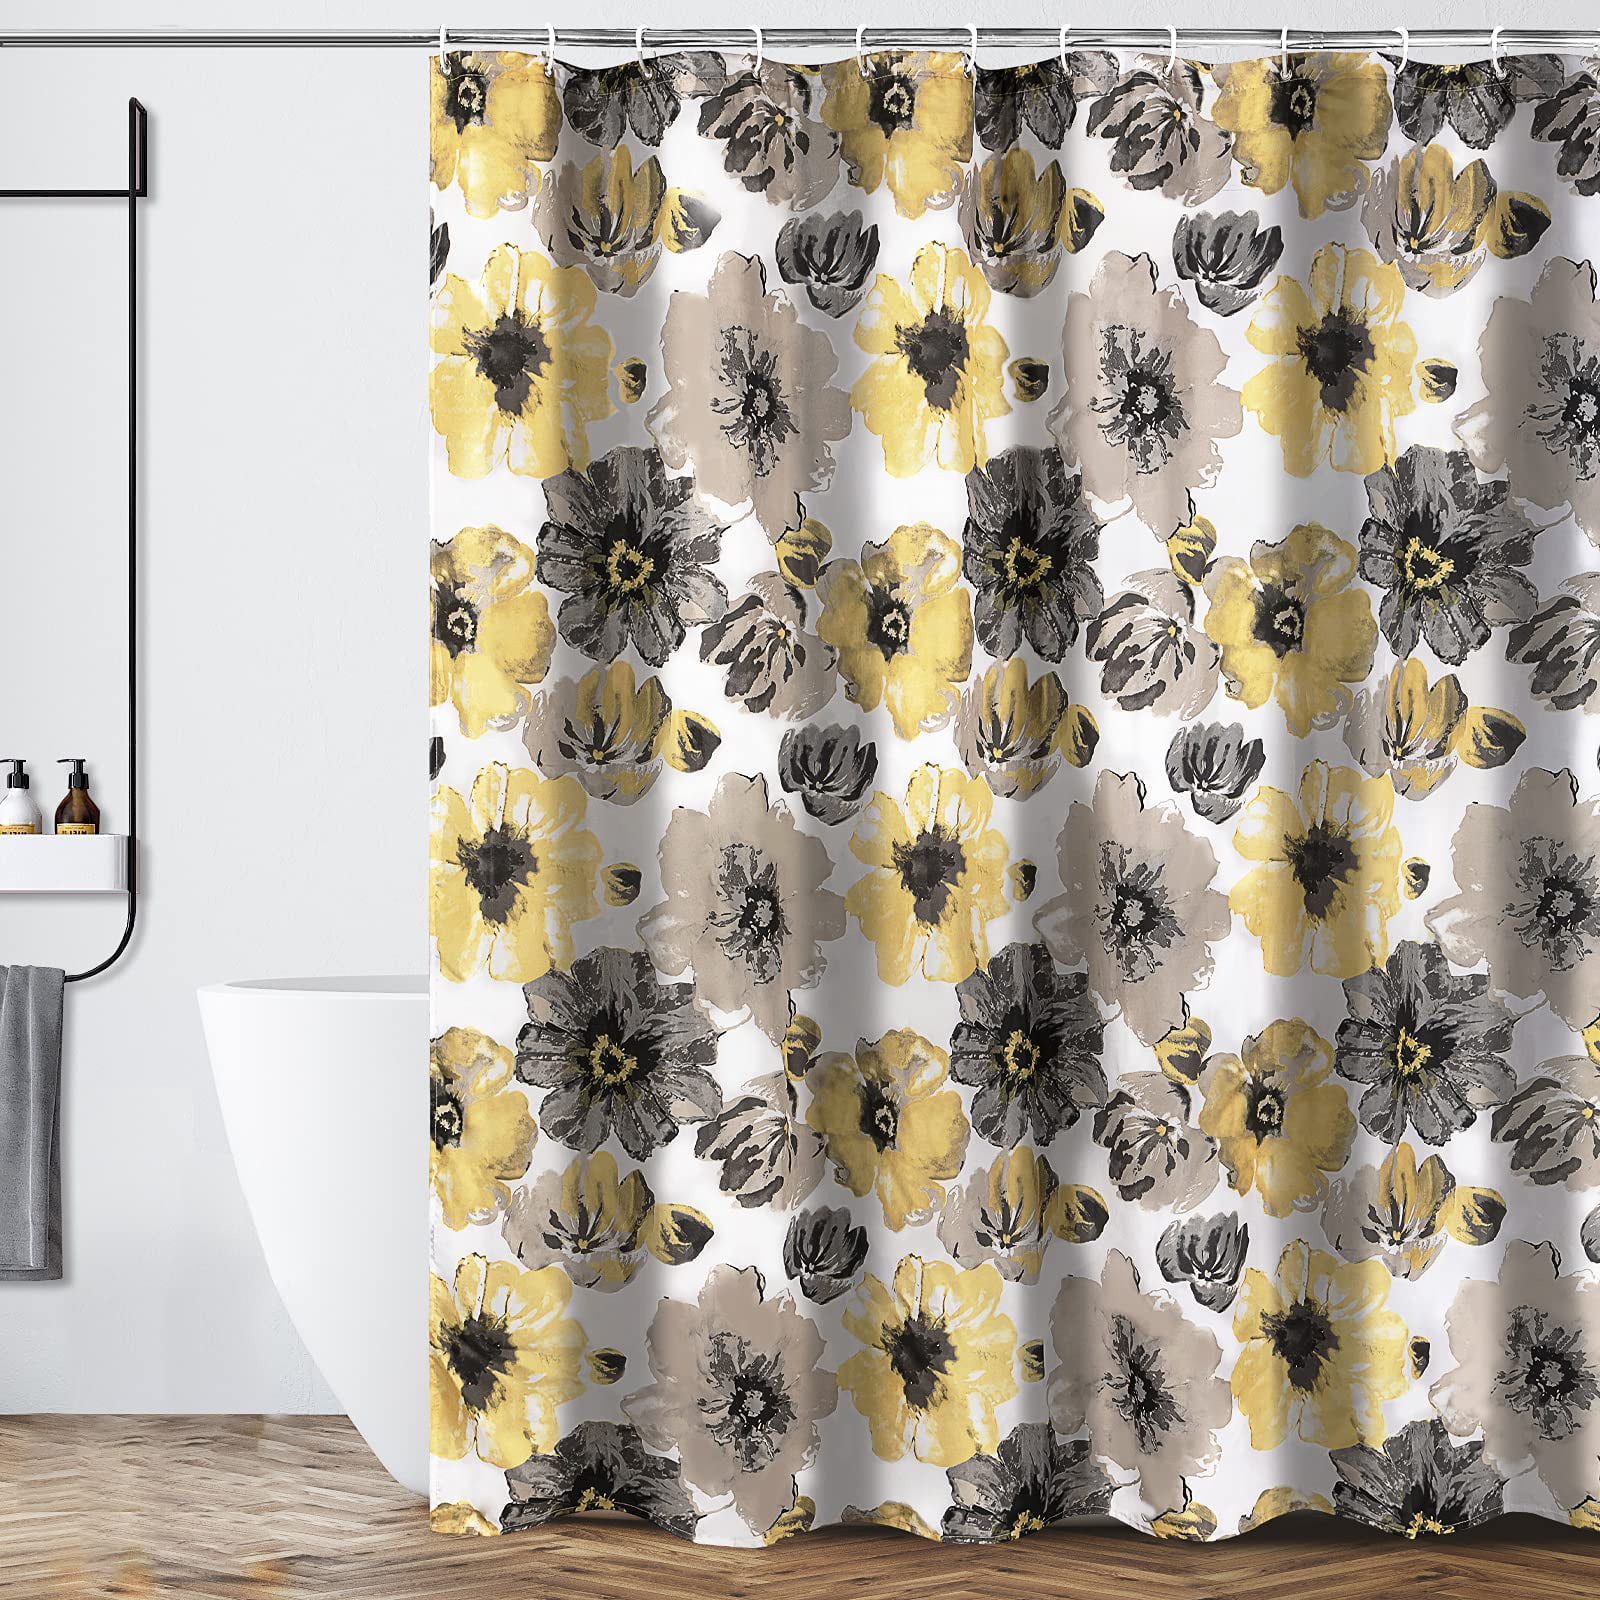 Bathroom Shower Curtain with Hooks Butterfly and Flower Pattern Shower Curtain Liner Fantastic Decorations Waterproof Polyester Fabric Bathroom Shower Curtain Liner with Hooks 72 x 72 